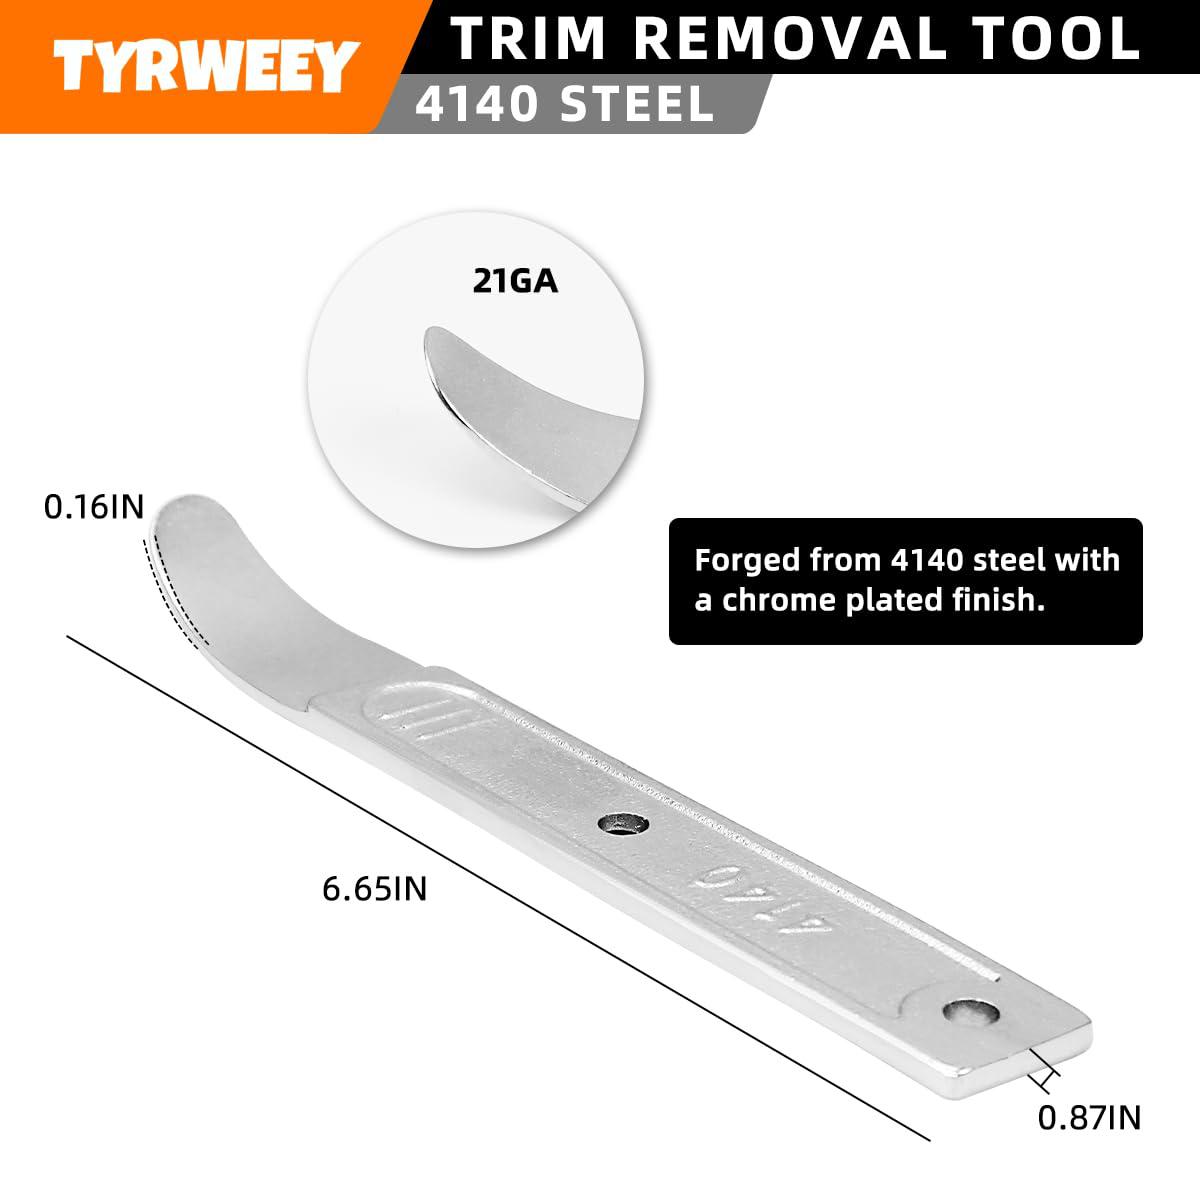 tyrweey 4140 pry tool, pry bar trim removal tool, pry tool, pocket pry bar, car trim removal tool kit, trim removal tool kit,